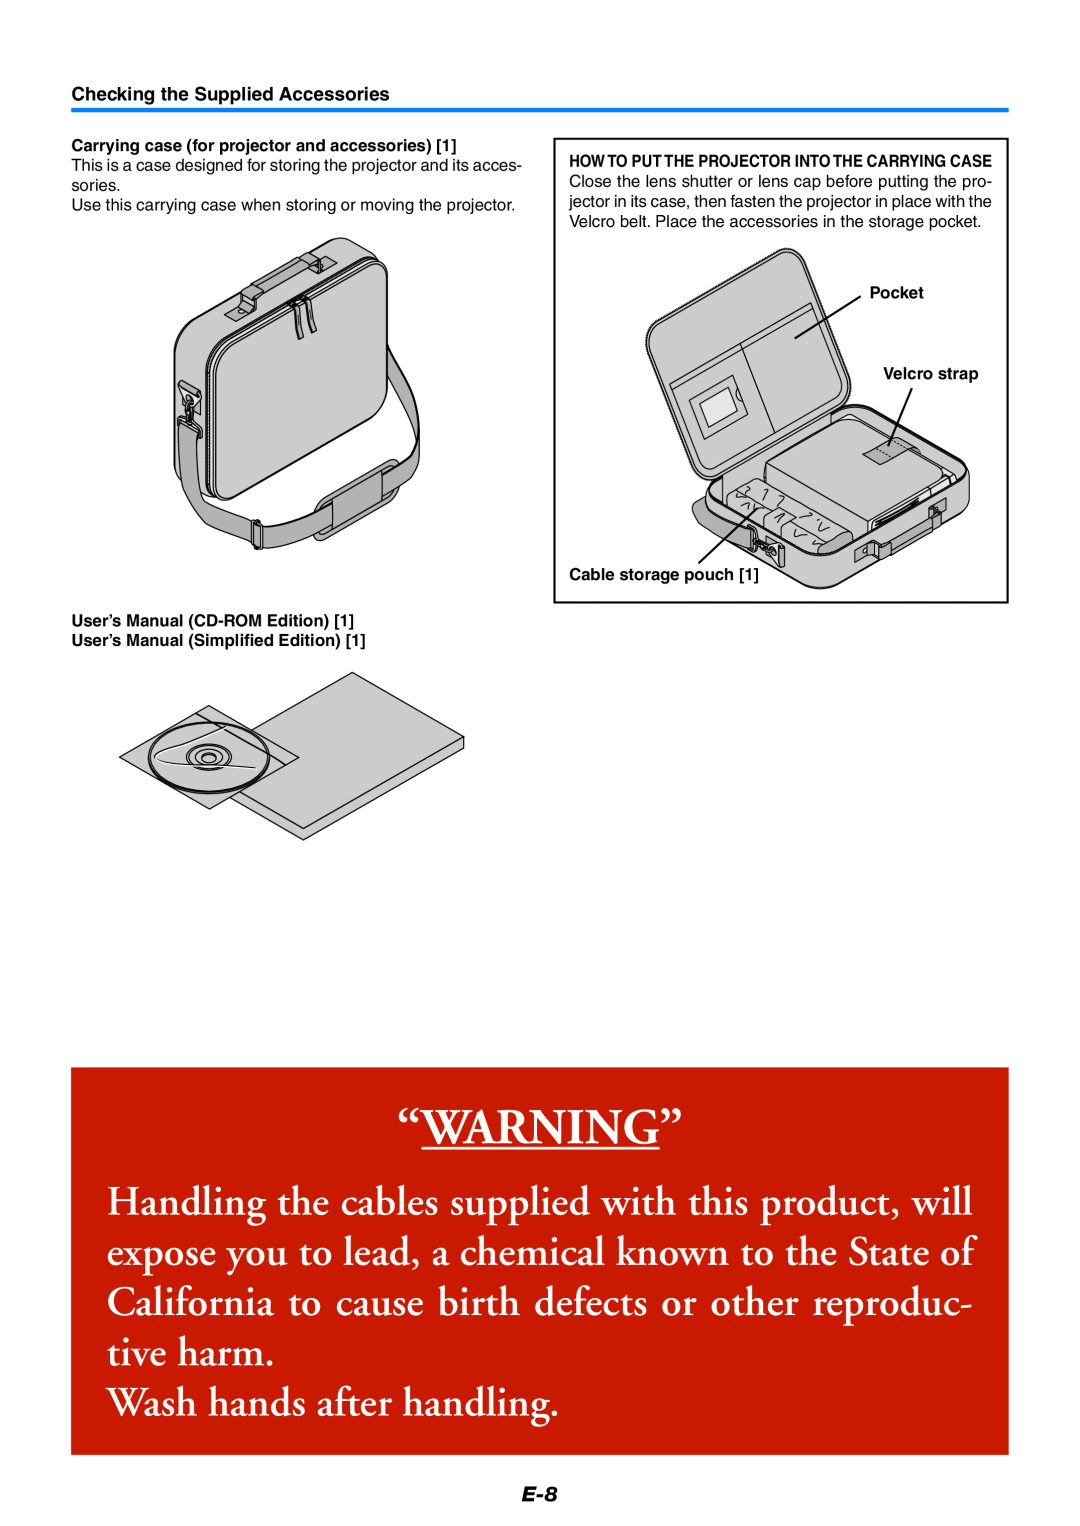 PLUS Vision U4-232 user manual Checking the Supplied Accessories, “Warning”, Wash hands after handling 